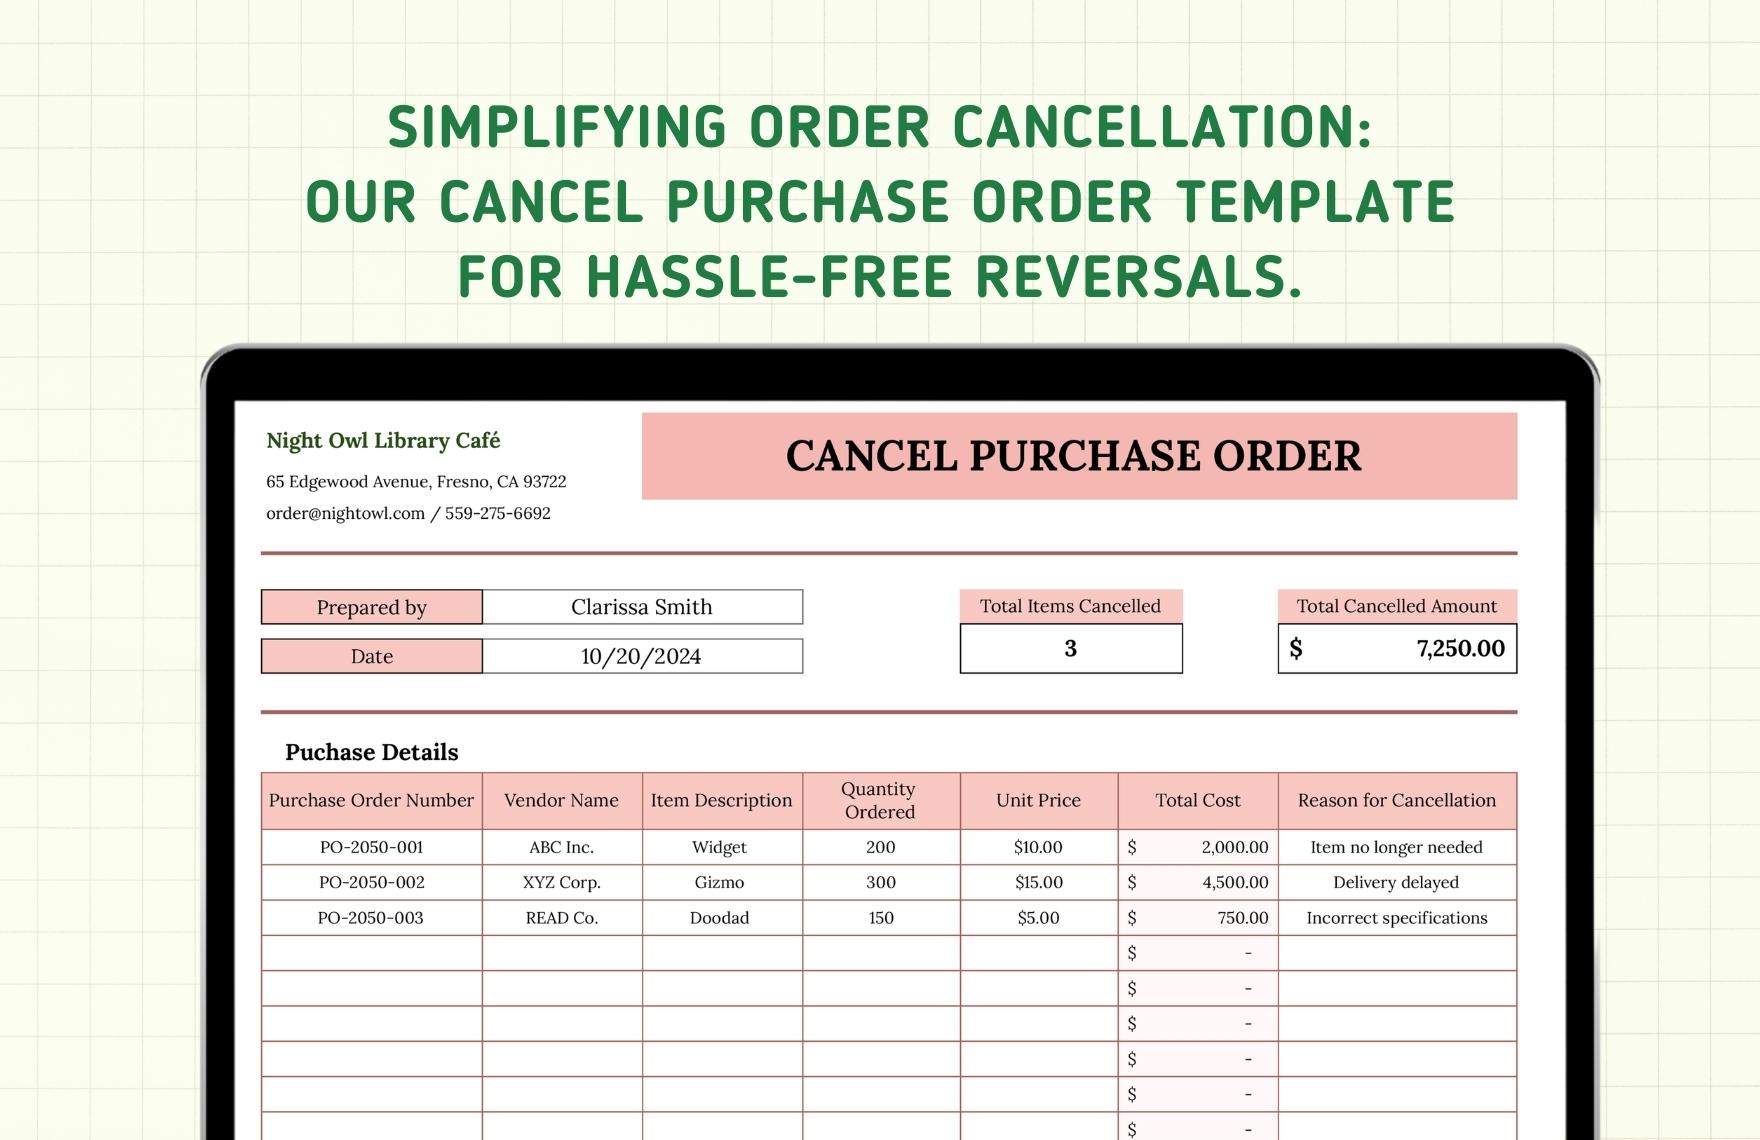 Cancel Purchase Order Template